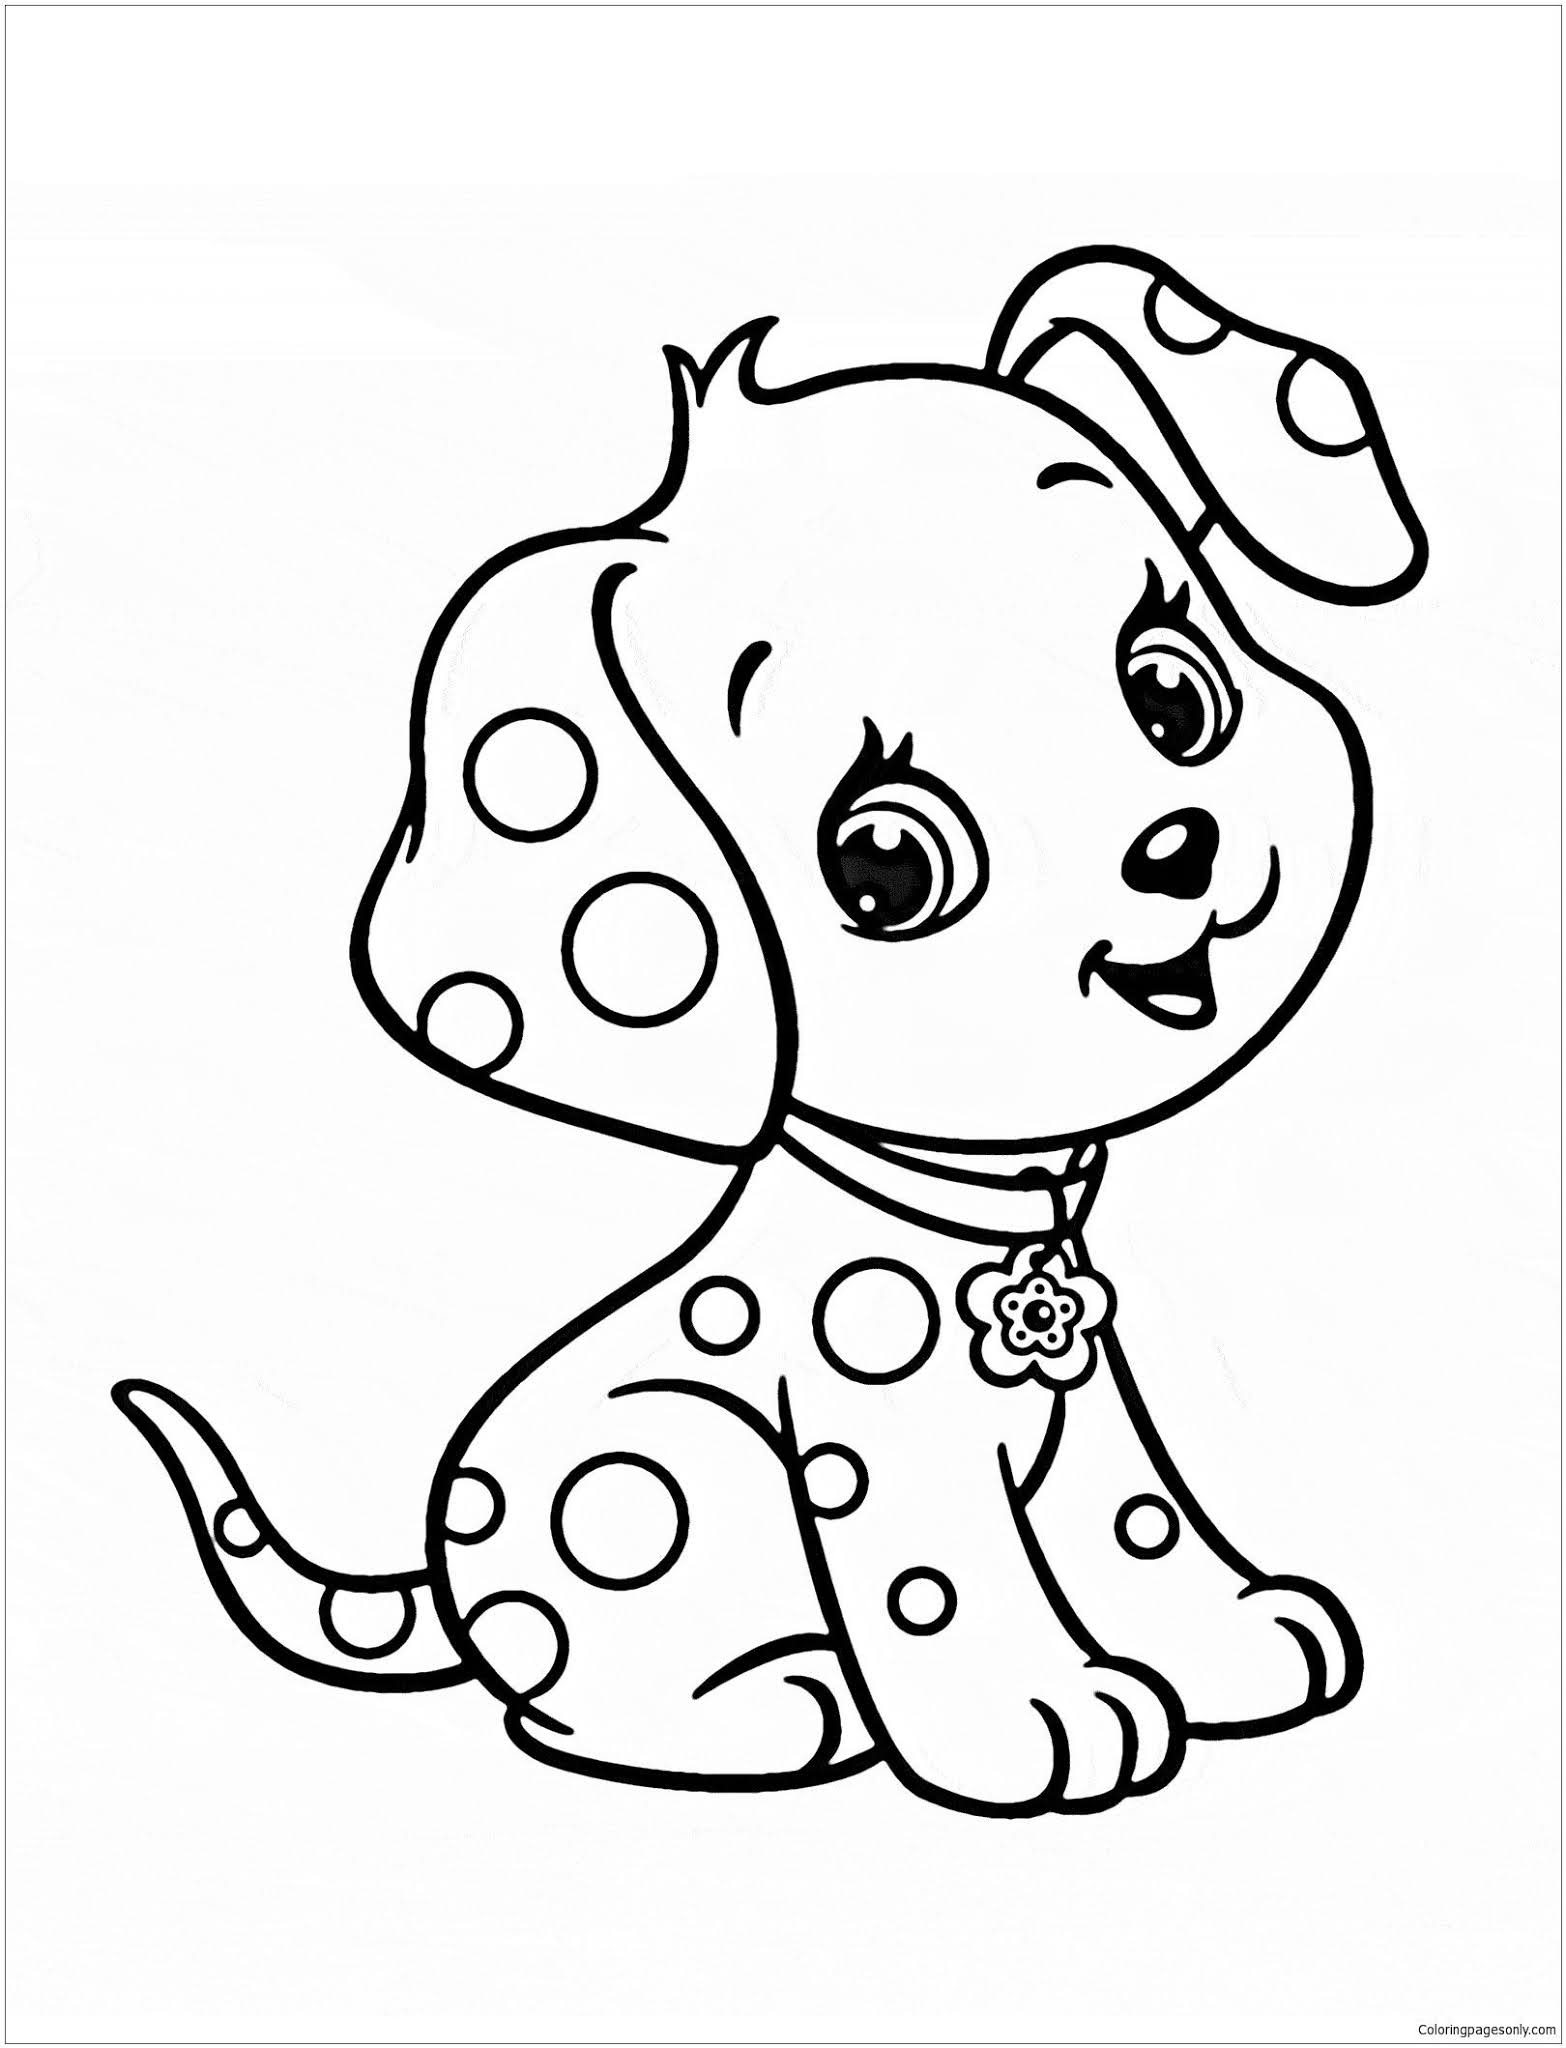 dog-coloring-page-coloring-print